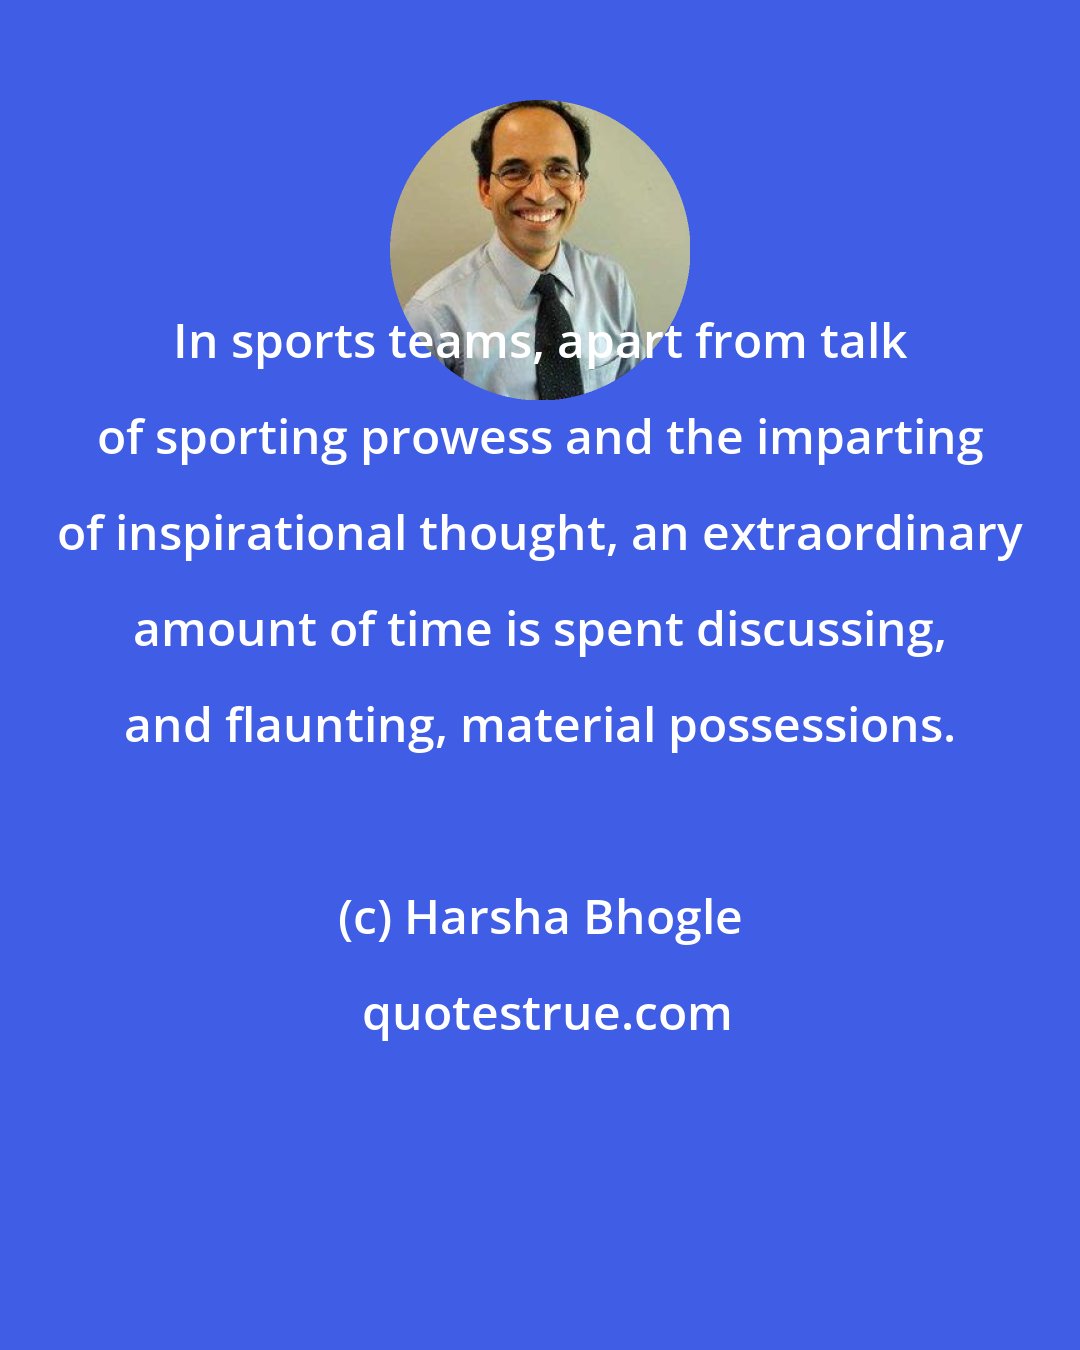 Harsha Bhogle: In sports teams, apart from talk of sporting prowess and the imparting of inspirational thought, an extraordinary amount of time is spent discussing, and flaunting, material possessions.